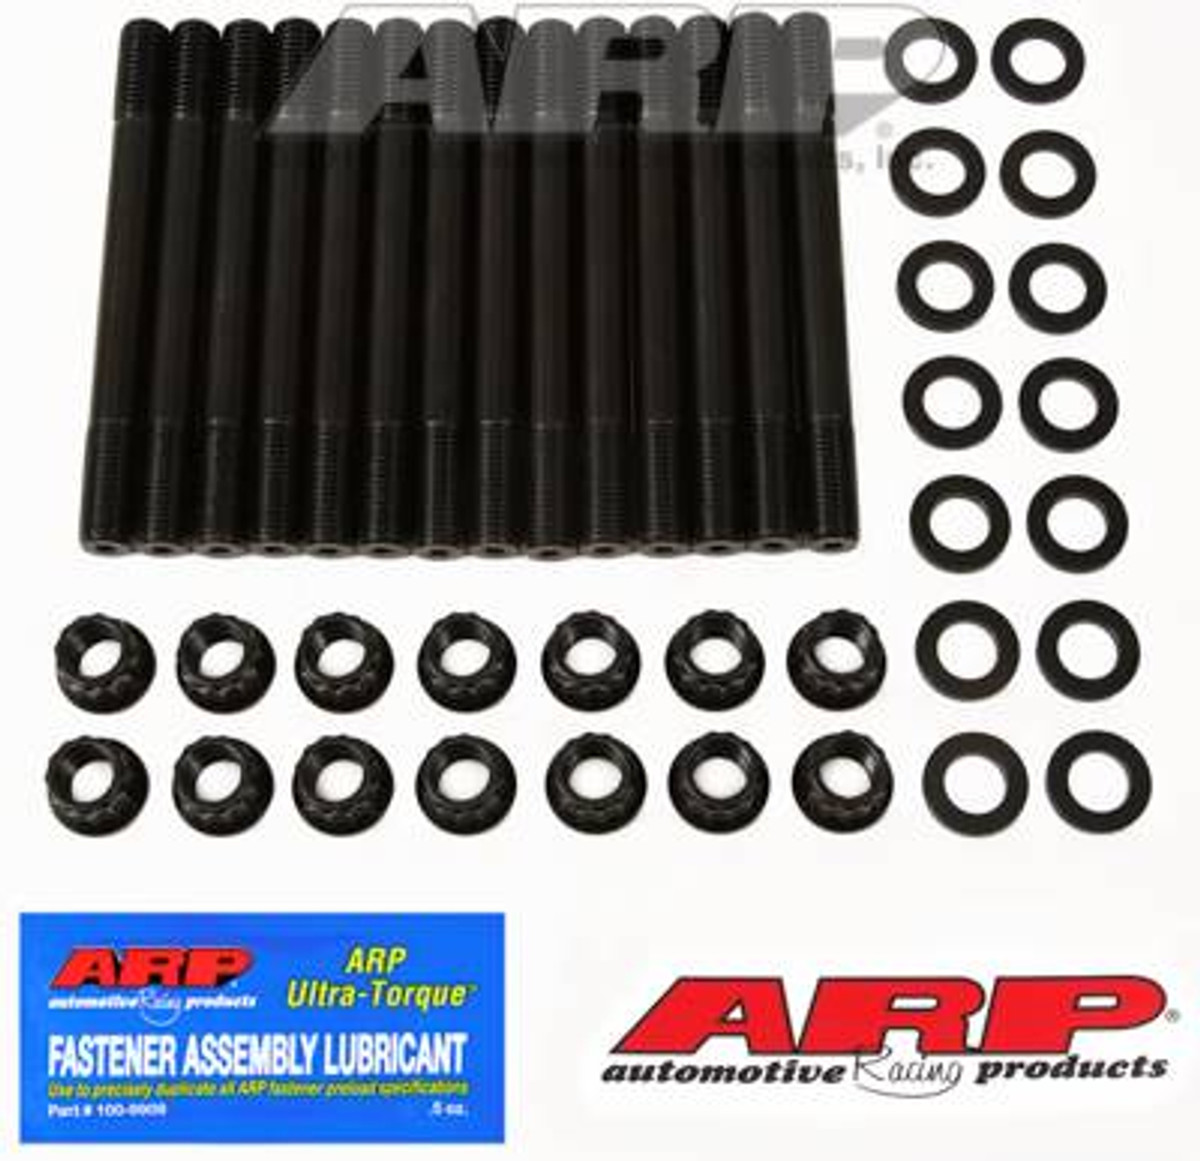 ARP - 14MM Main Studs - 1997 And Earlier Dodge 5.9L 12V 247-5402